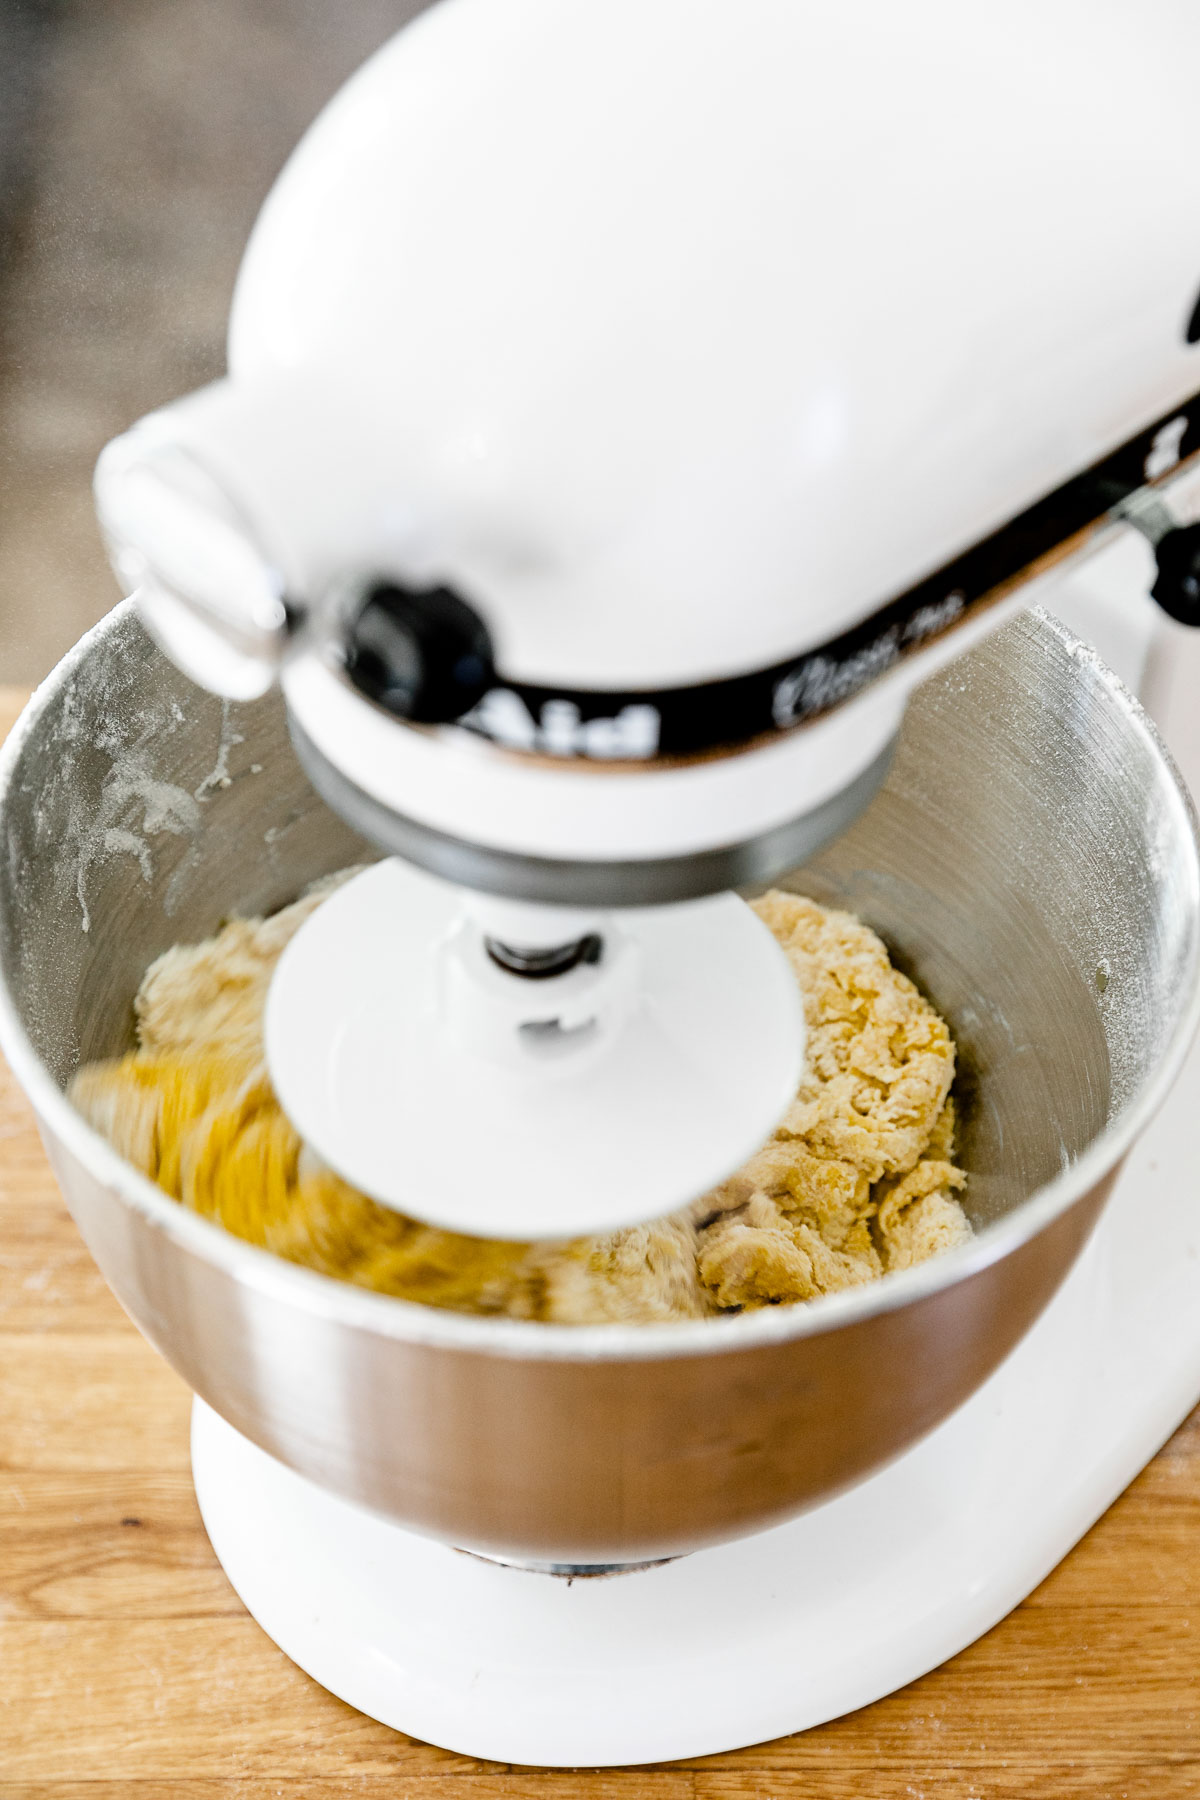 How to Make Fresh Pasta Dough with a Stand Mixer, Step 2: Mix the pasta dough. A KitchenAid Stand Mixer with the dough hook attachment connected is turned on and being used knead fresh pasta dough that is forming within the mixing bowl. The stand mixer rests atop a butcher block countertop.